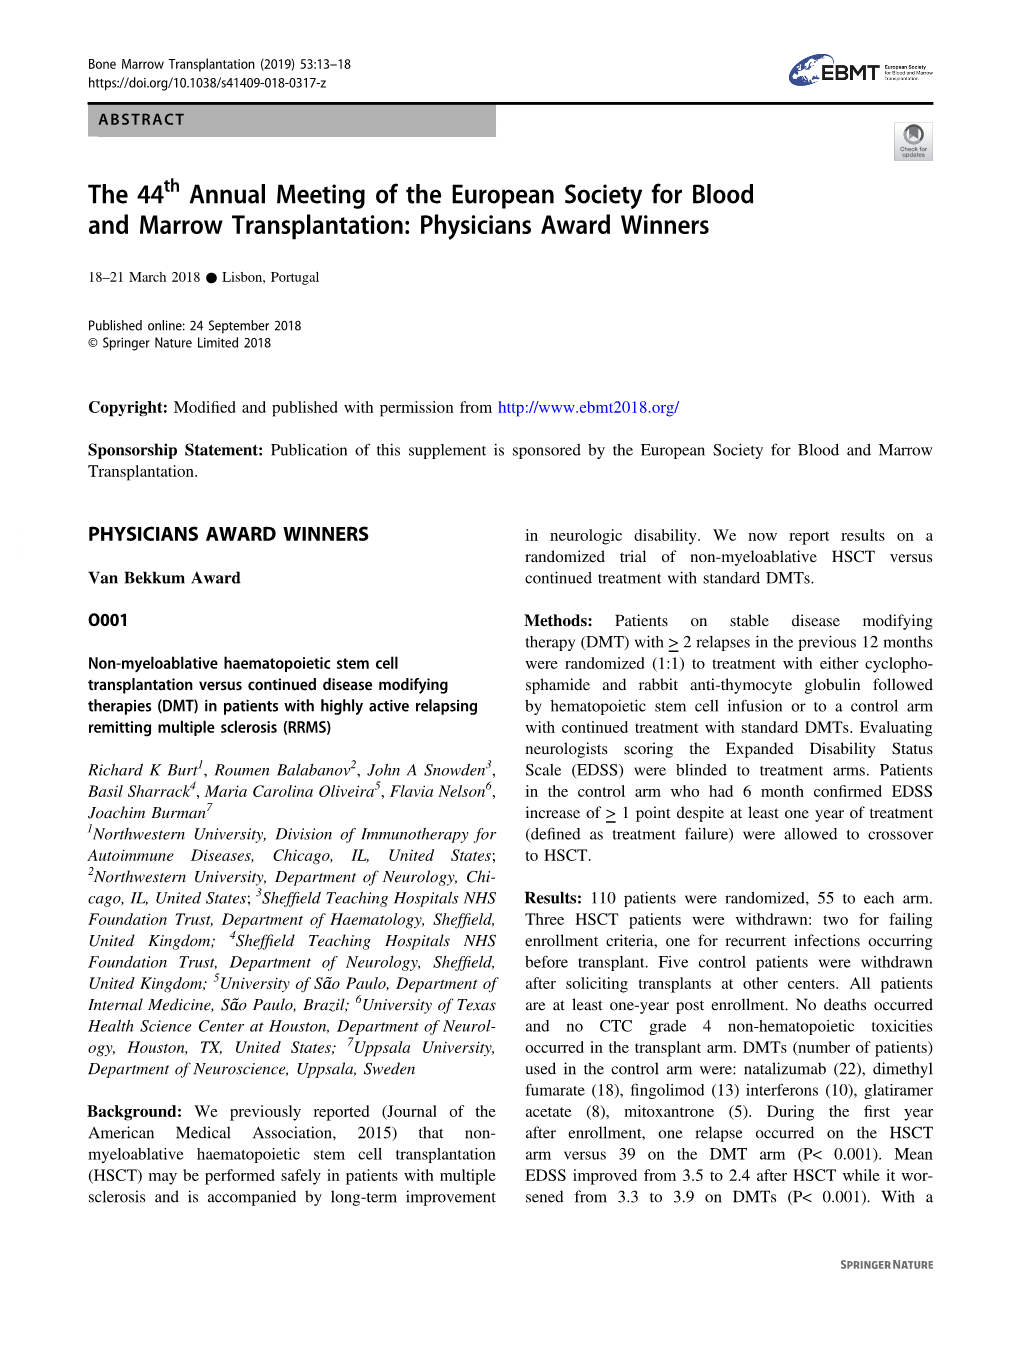 The 44Th Annual Meeting of the European Society for Blood and Marrow Transplantation: Physicians Award Winners